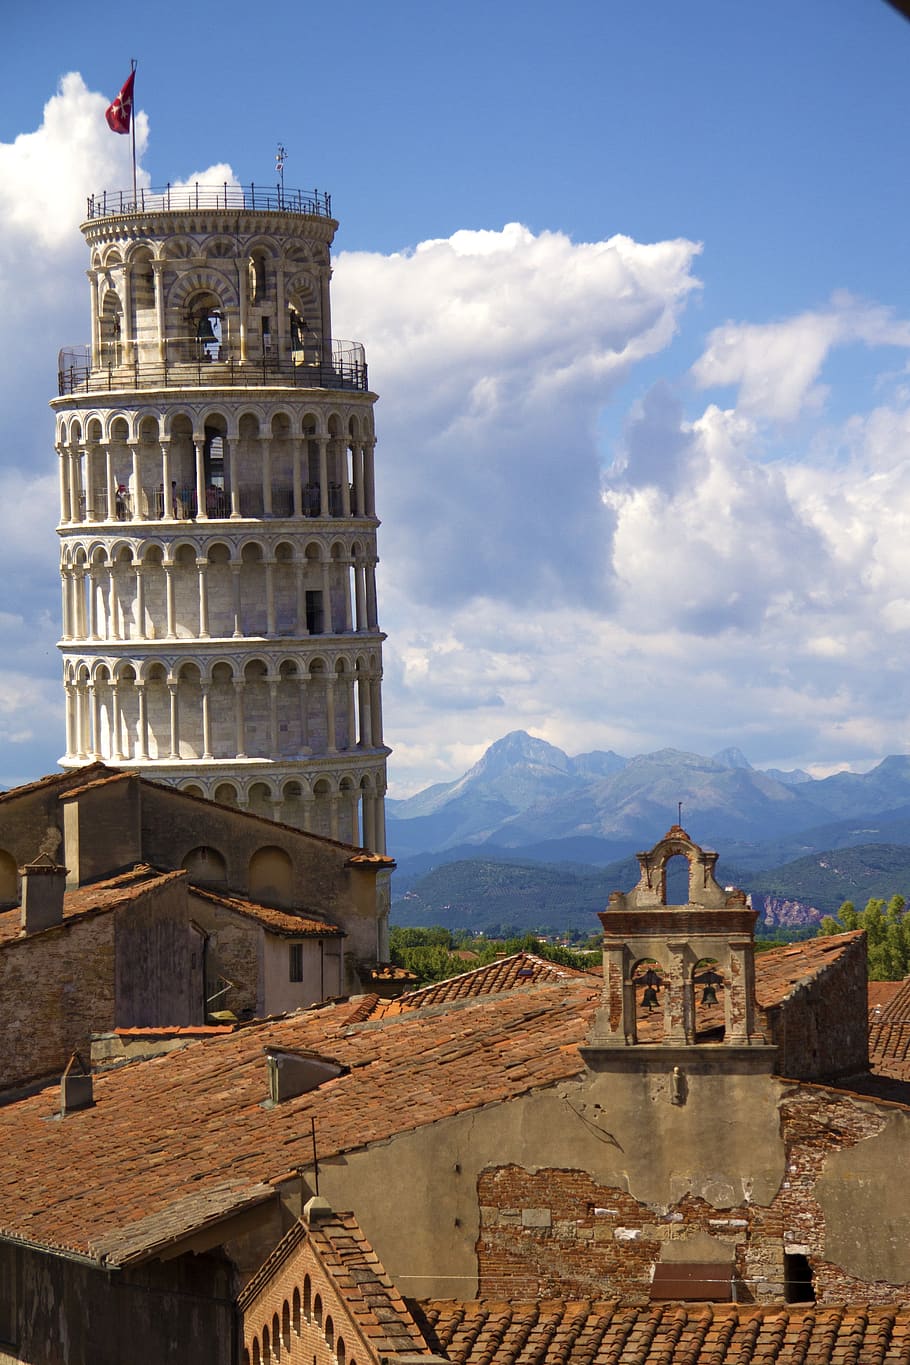 pisa, leaning tower, rooftops, italy, architecture, tourism, landmark, monuments, built structure, building exterior